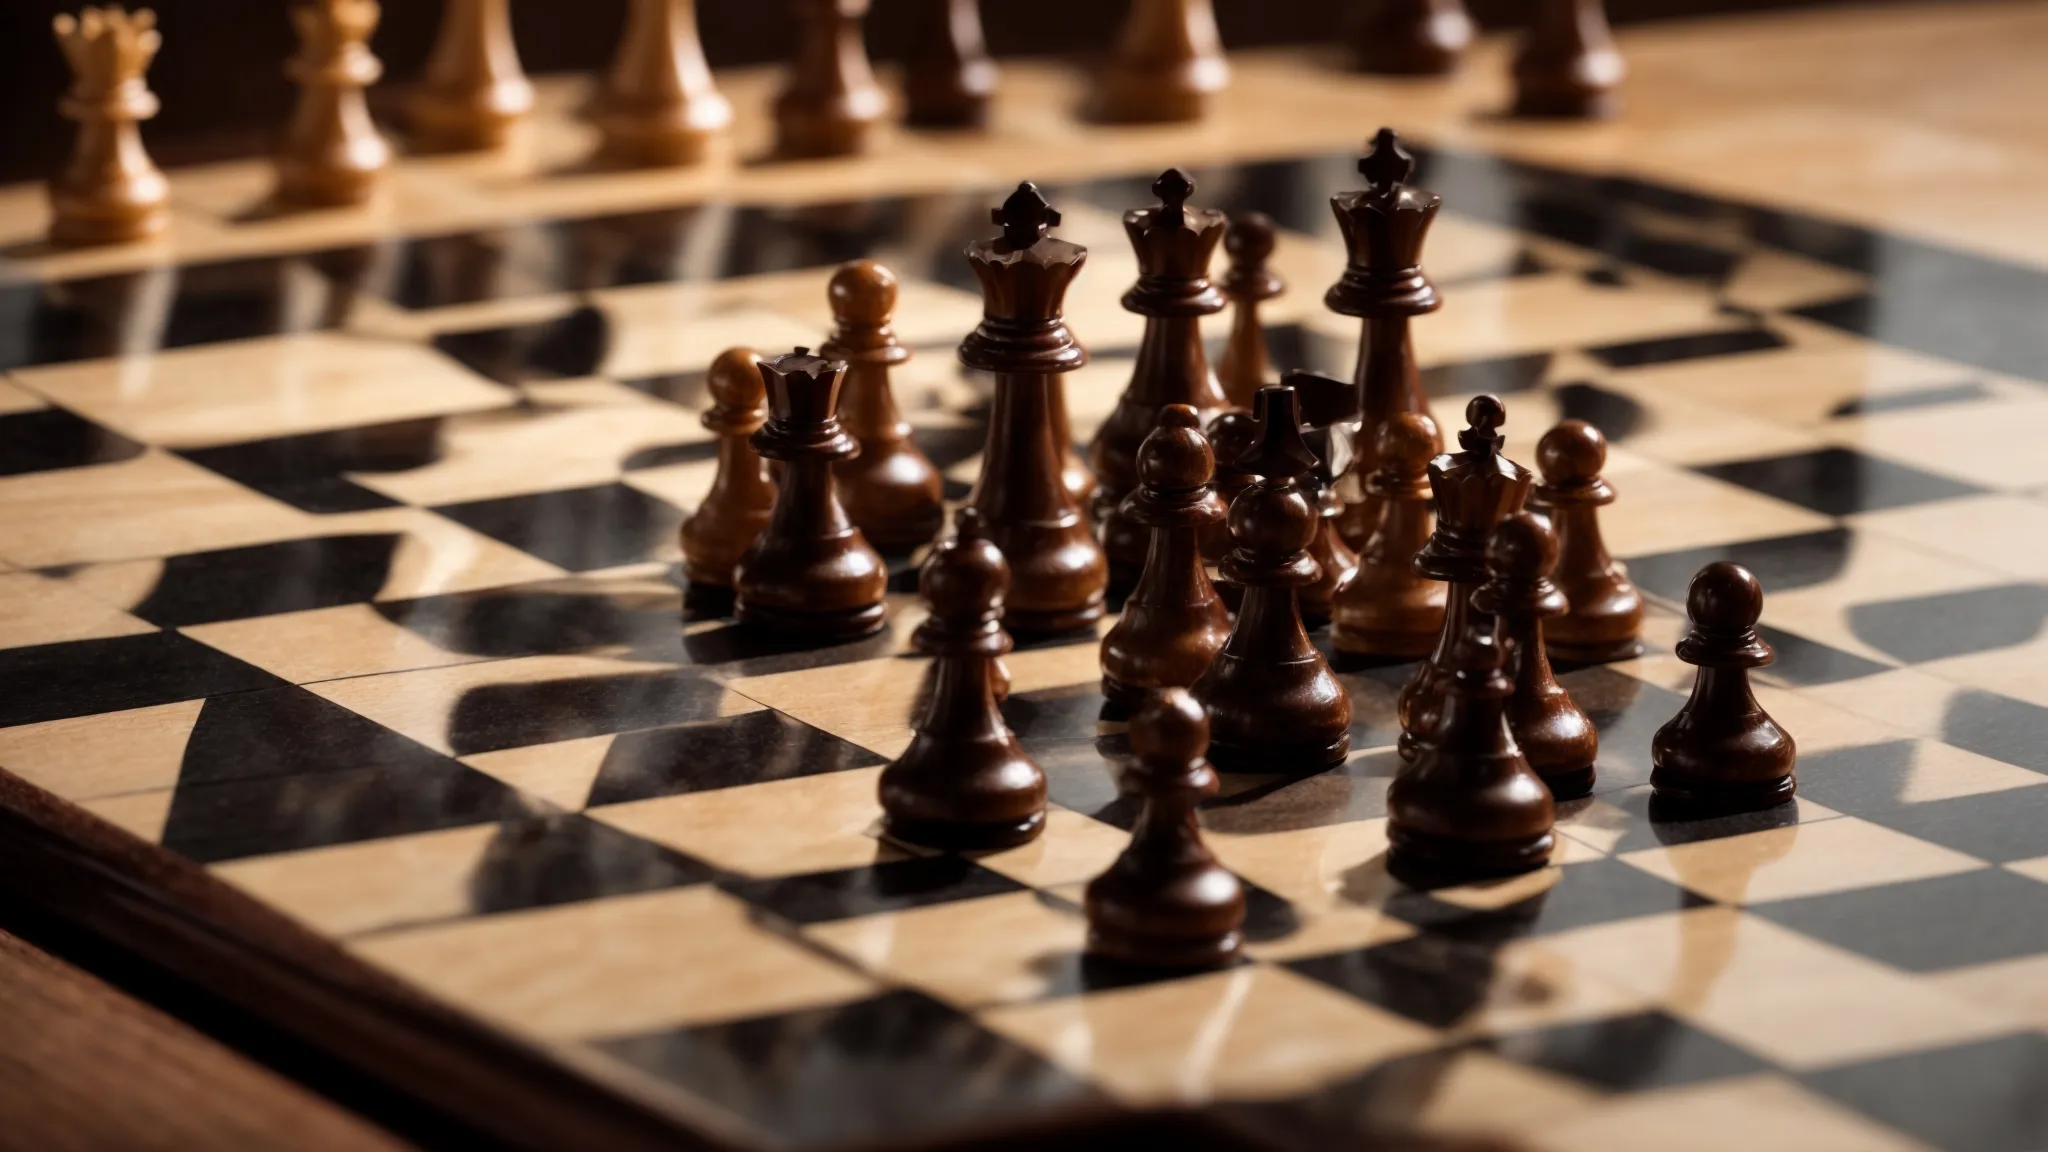 a chessboard with pieces positioned in mid-game symbolizes strategic planning and competition.